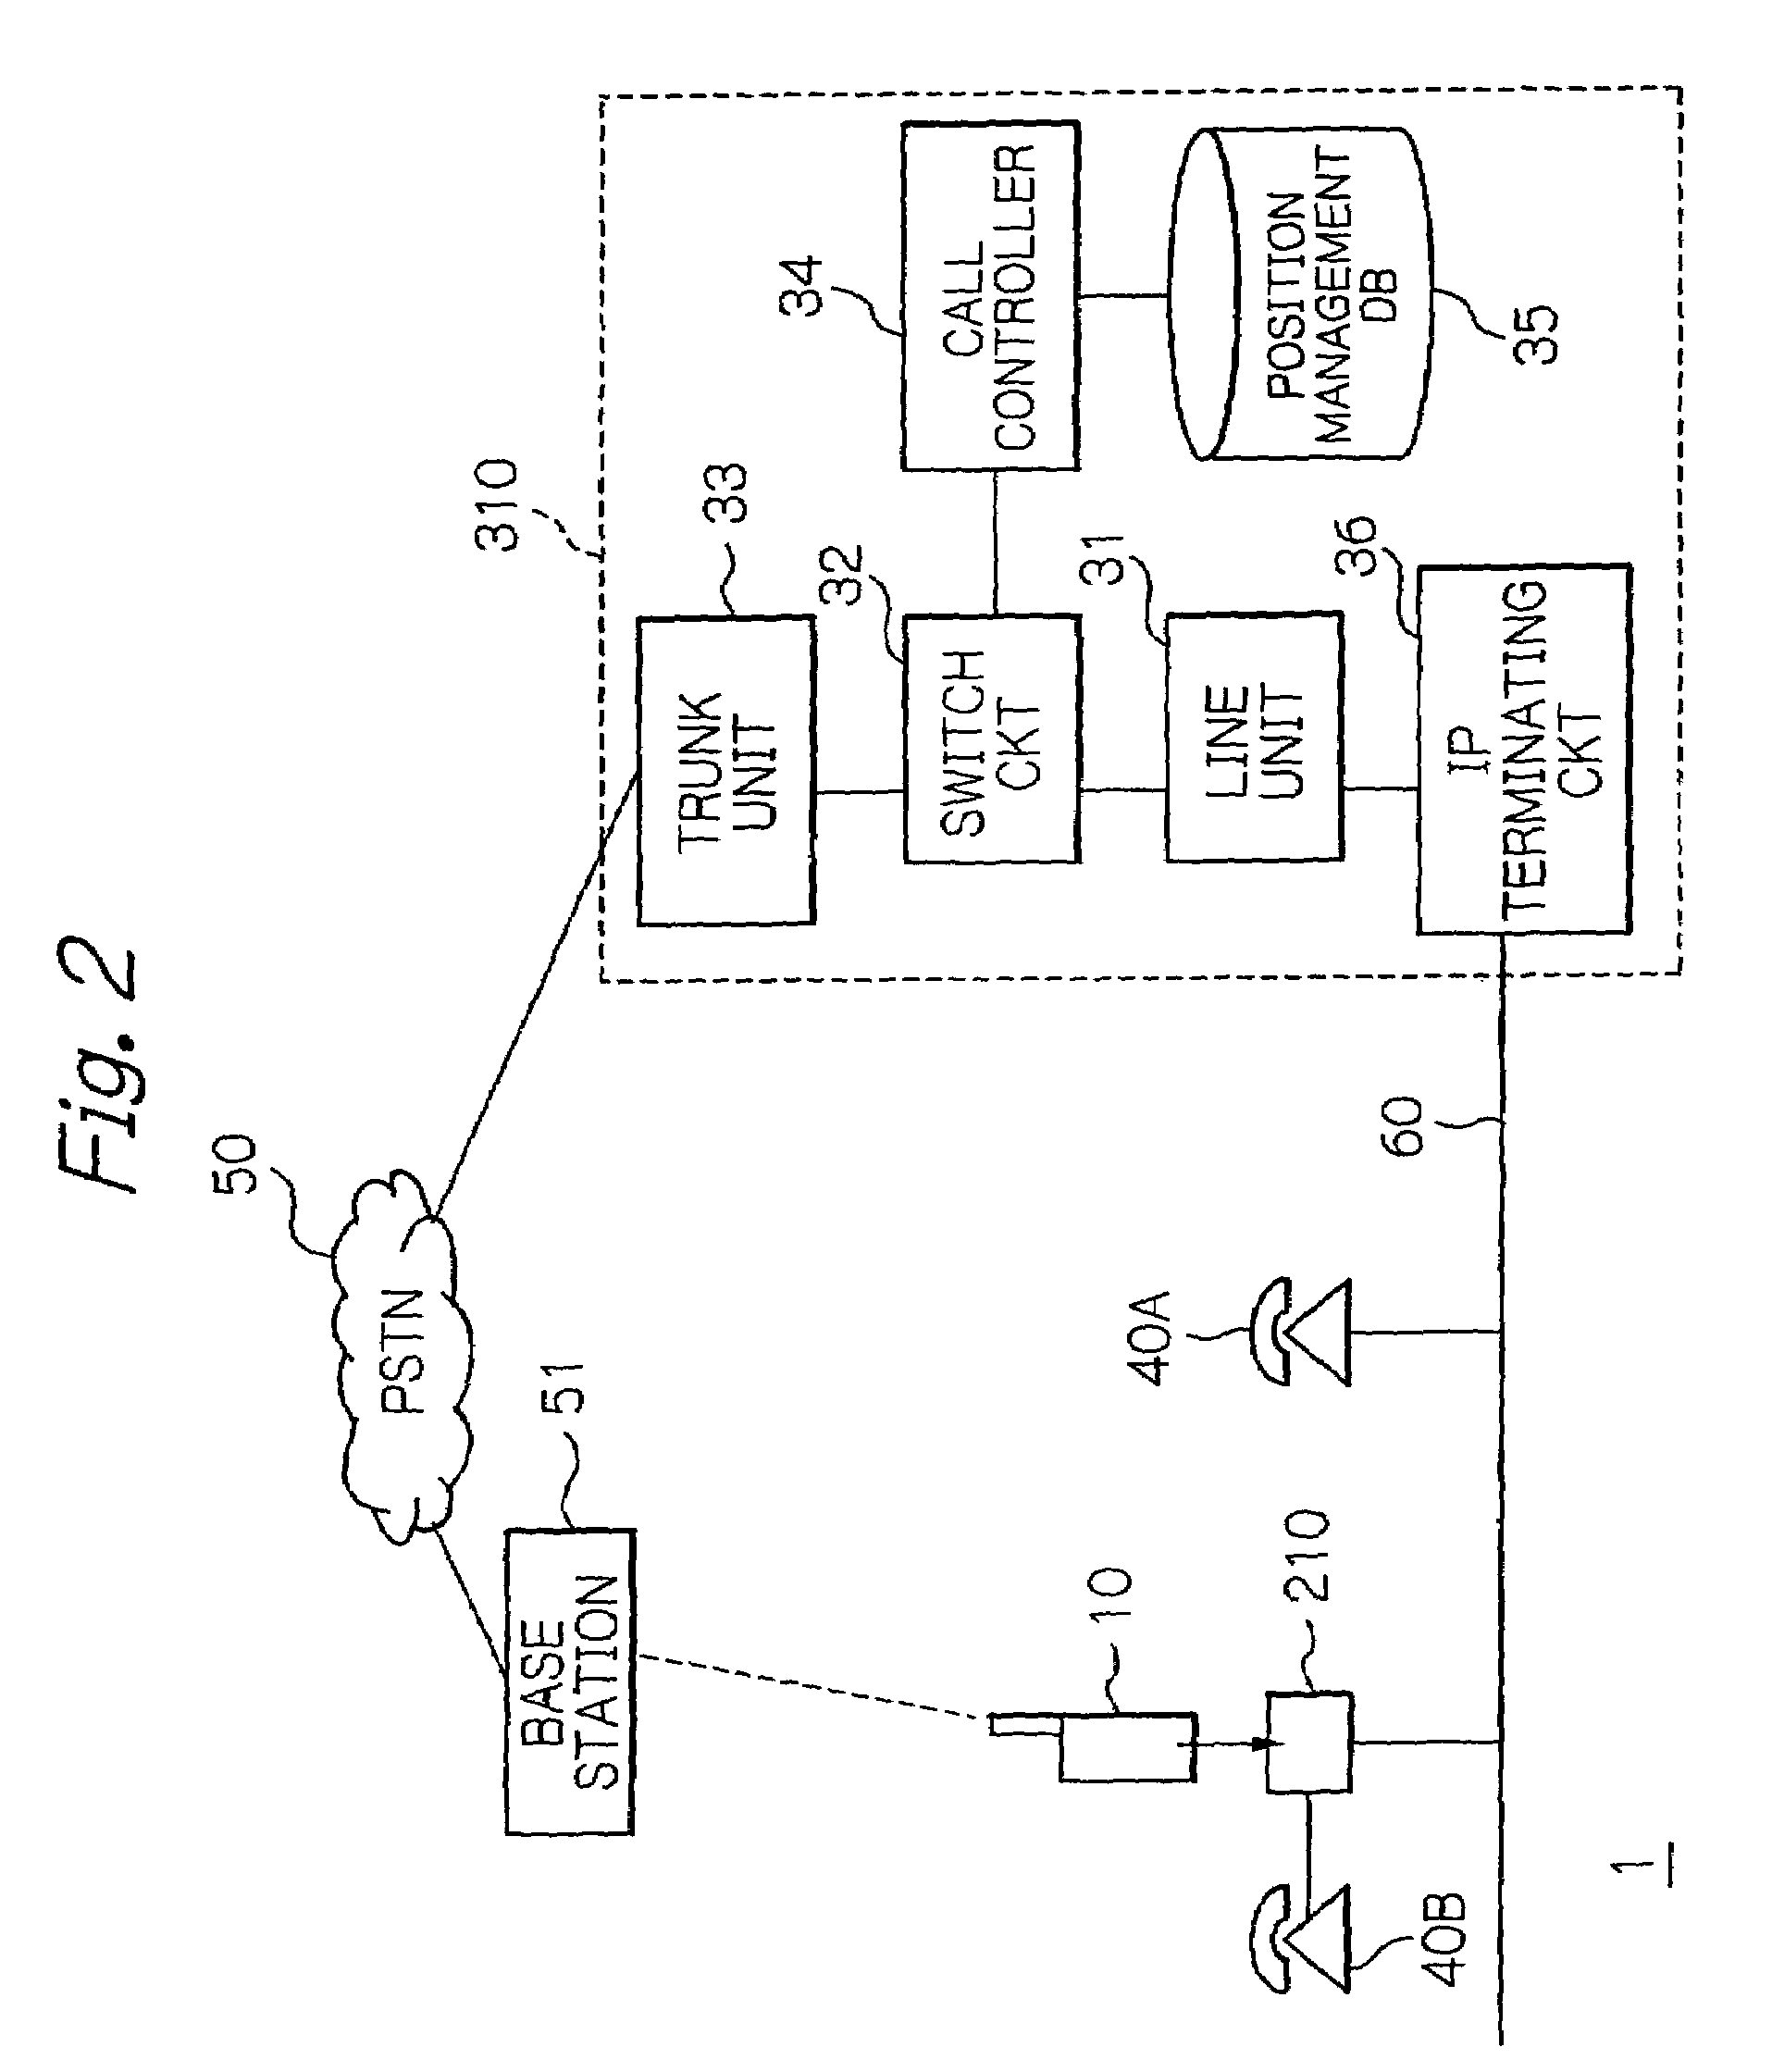 Switching system connecting a radio communication terminal via a LAN line to a public switched network or a leased line